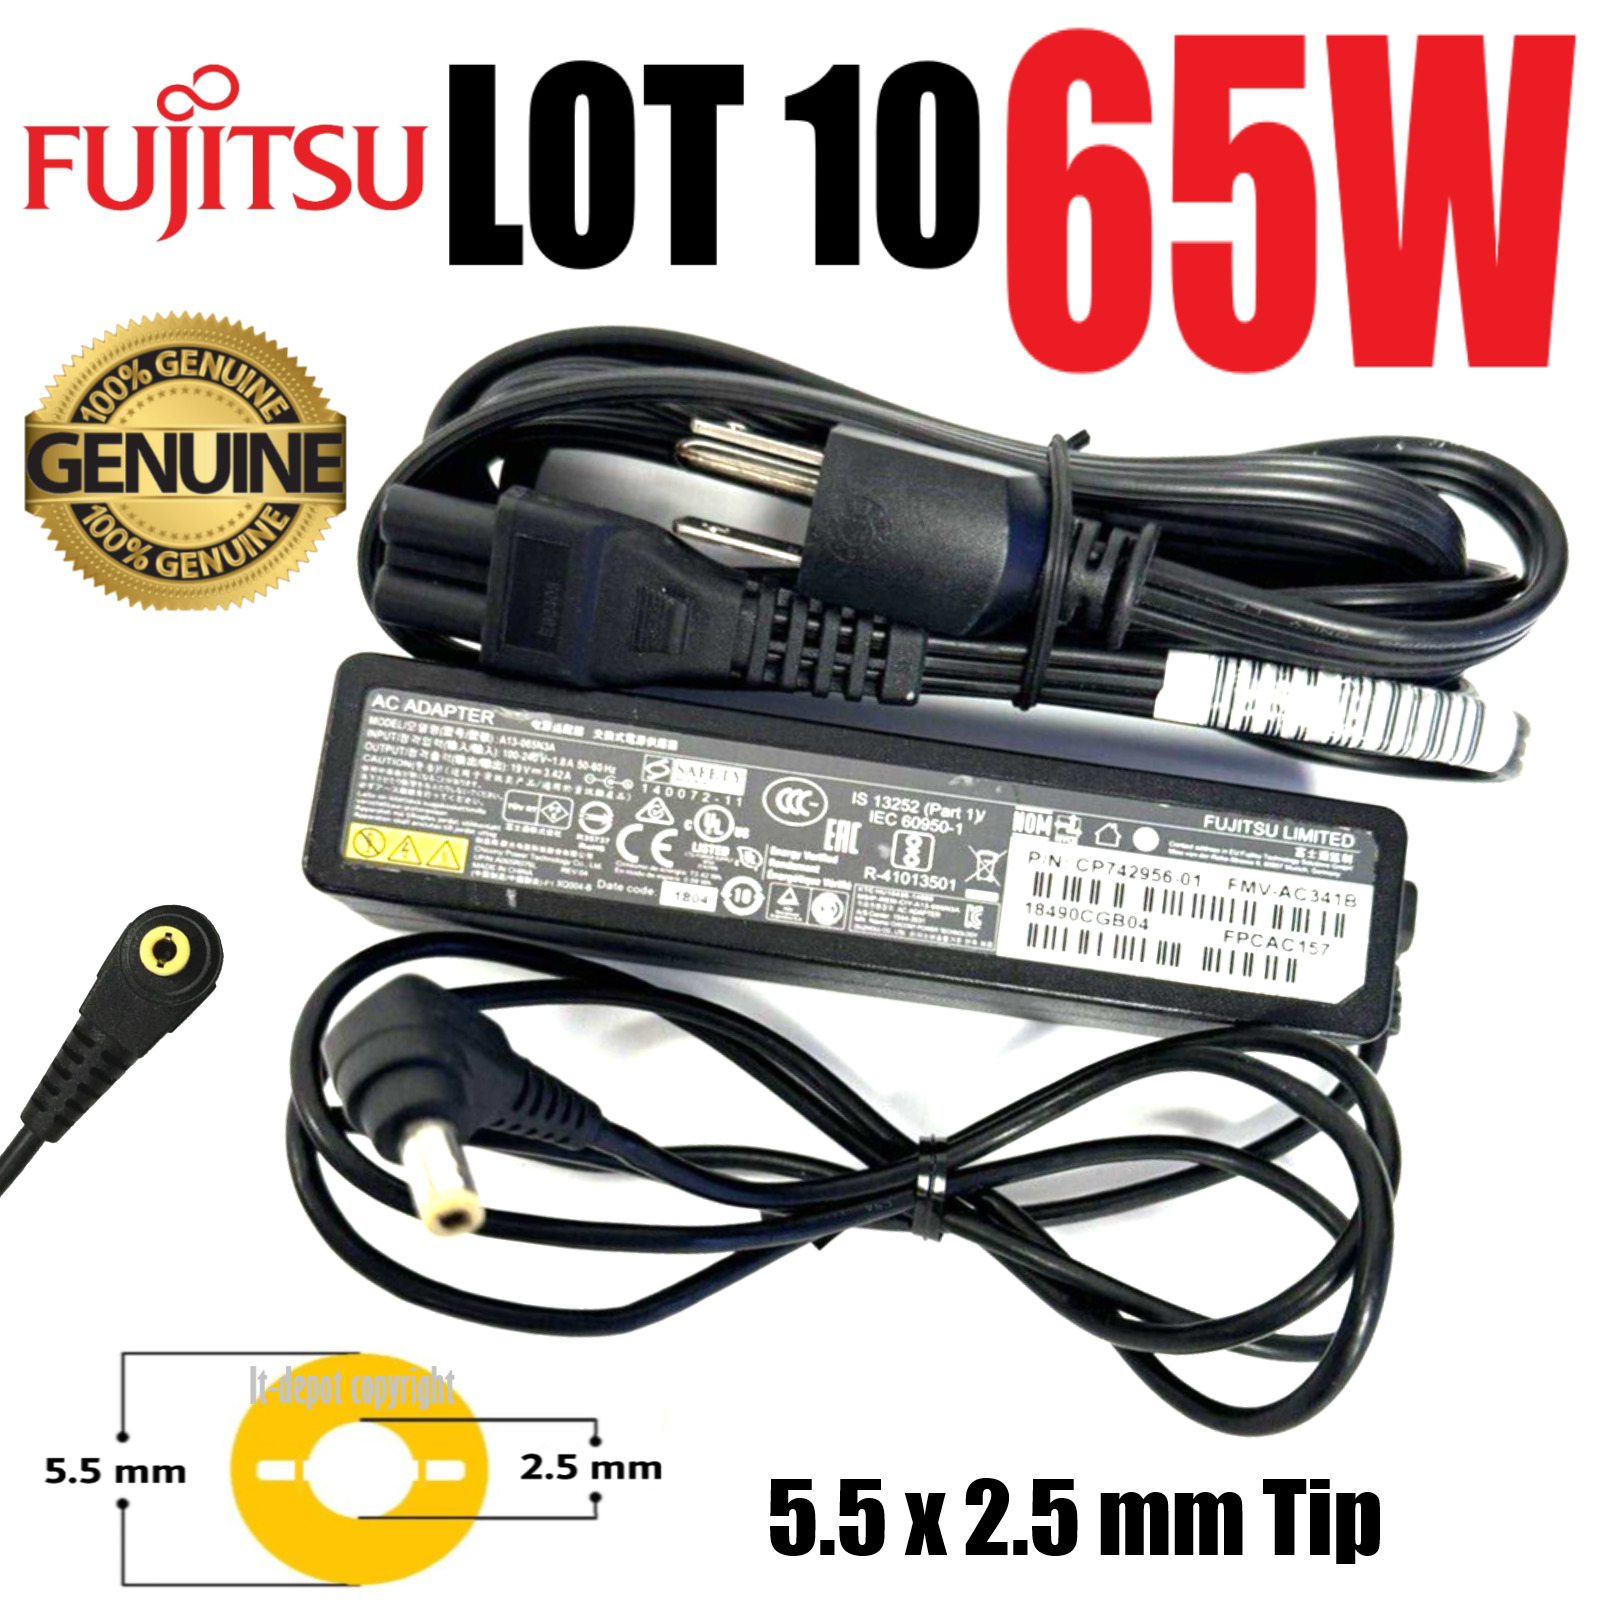 LOT 10 OEM Fujitsu Lifebook T731 T732 T730 65W AC Adapter Charger 5.5x2.5mm Tip